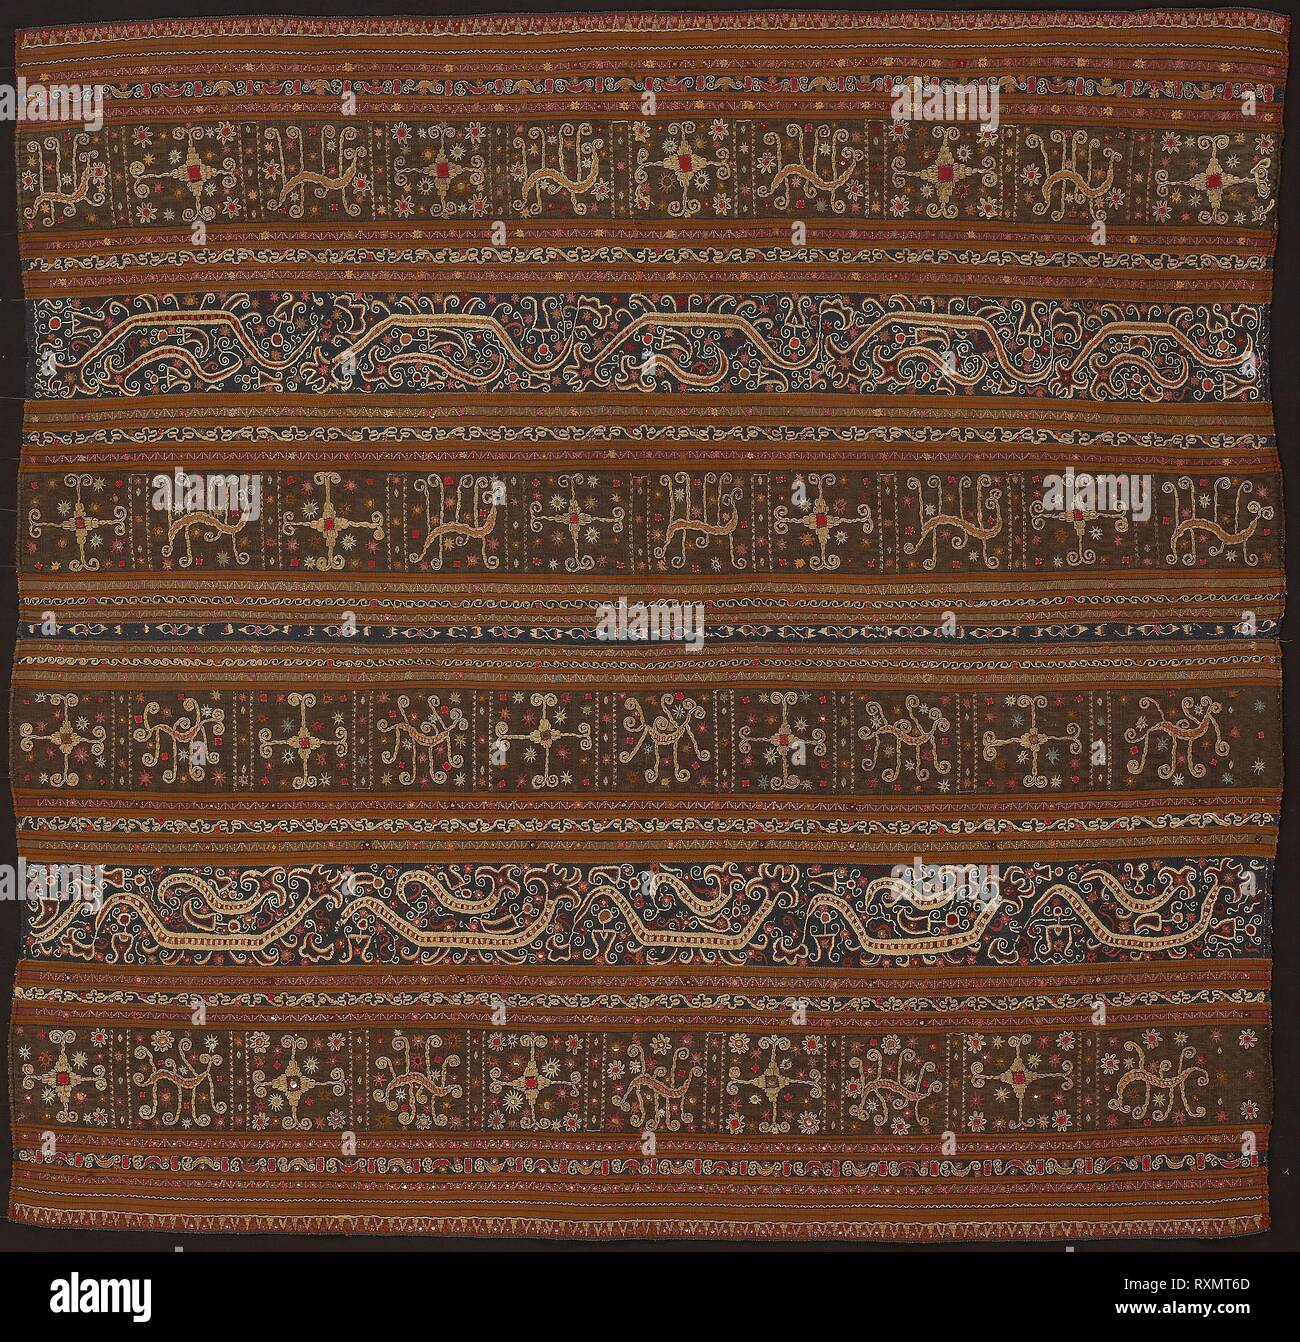 Ceremonial Skirt (tapis). Abung people; Indonesia, South Sumatra, northern Lampung area, Monggala. Date: 1801-1825. Dimensions: 110.5 x 113.7 cm (43 1/2 x 44 3/4 in.). Two panels joined: cotton and silk, stripes of warp-faced, weft ribbed plain weave; warp-faced, weft ribbed plain weave with supplementary brocading wefts, and warp resist dyed (warp ikat) plain weave with supplementary brocading wefts; appliquéd with wool, plain weave; embroidered with silk, cotton, pineapple fiber, silver-leaf-over-lacquered-paper strip wrapped cotton and silver-leaf-over-lacquered-paper strip wrapped bast fib Stock Photo